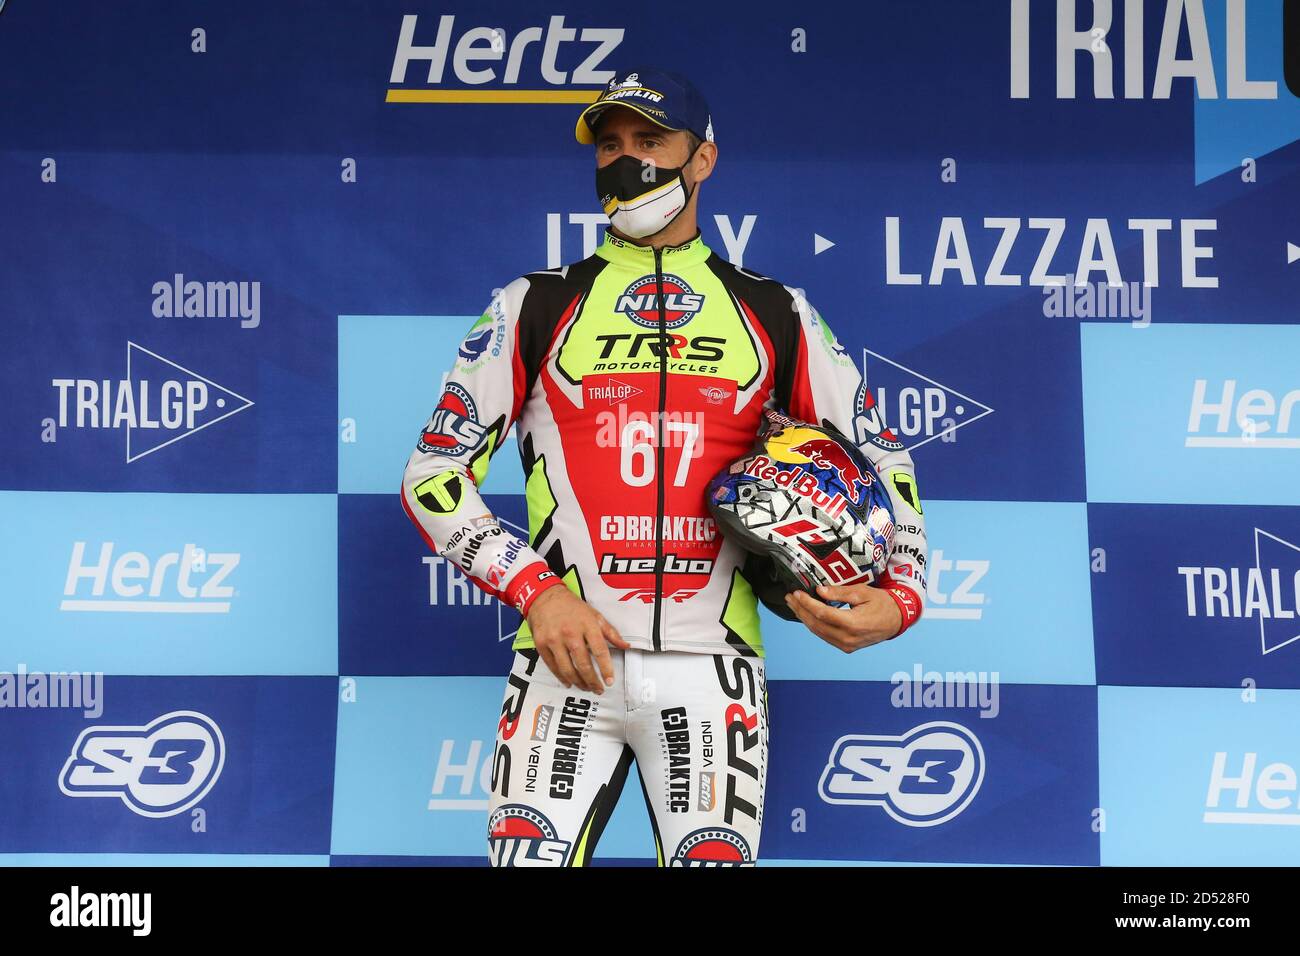 Adam Sans Raga (Vice World Champion) during the world title award ceremony  at Moto Club Lazzate circuit on October 11, 2020 in Lazzate (MB), Italy  Stock Photo - Alamy